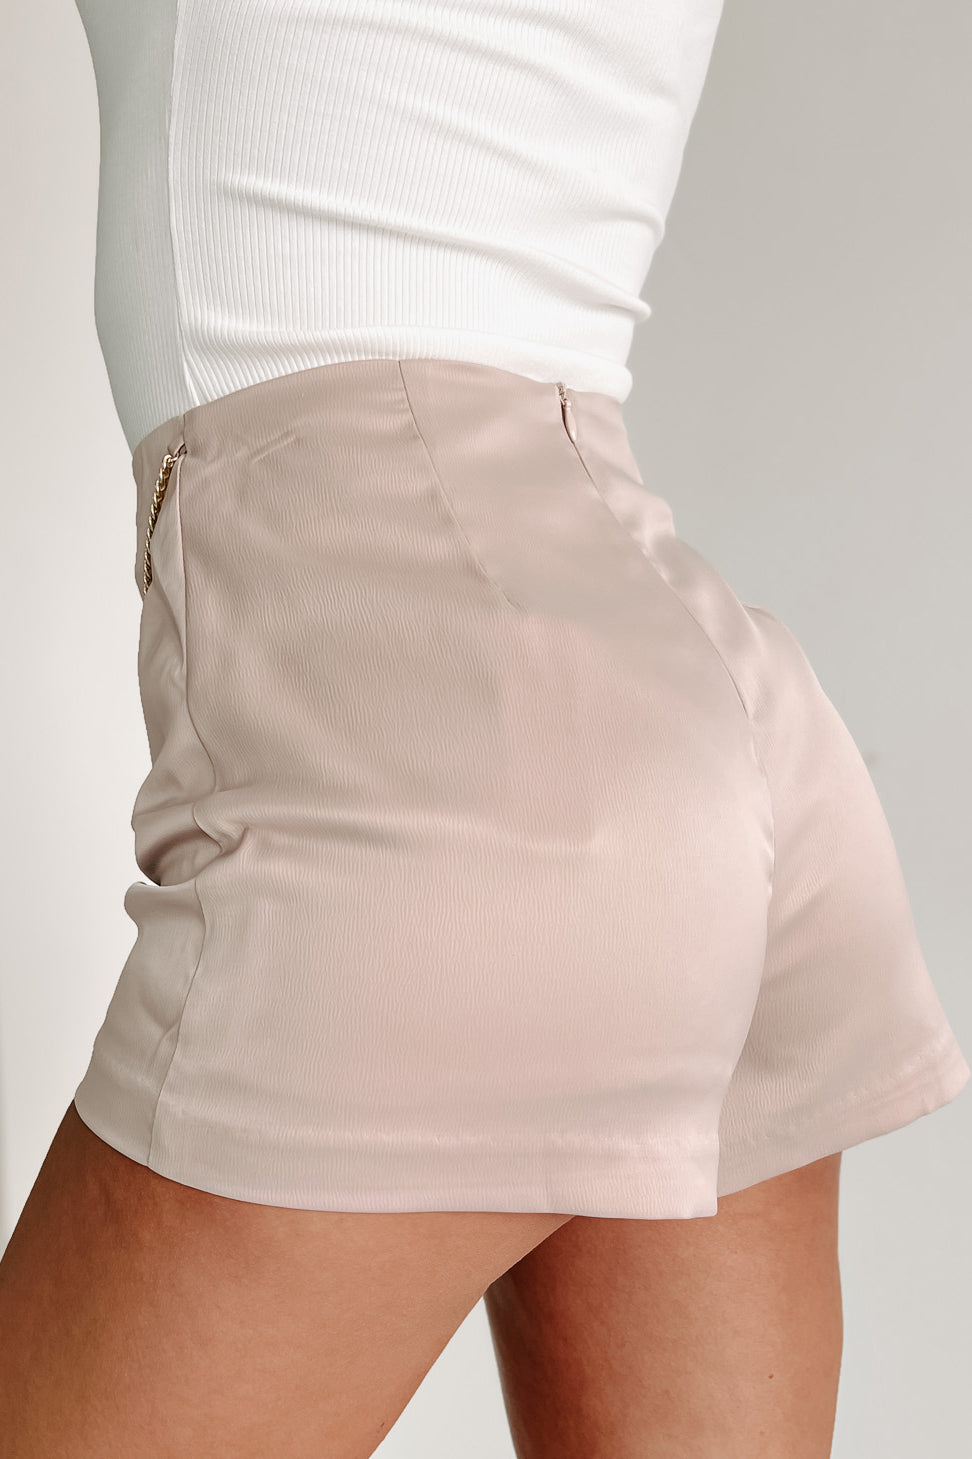 Running Back To You Satin Skort With Chain Detail (Taupe) - NanaMacs